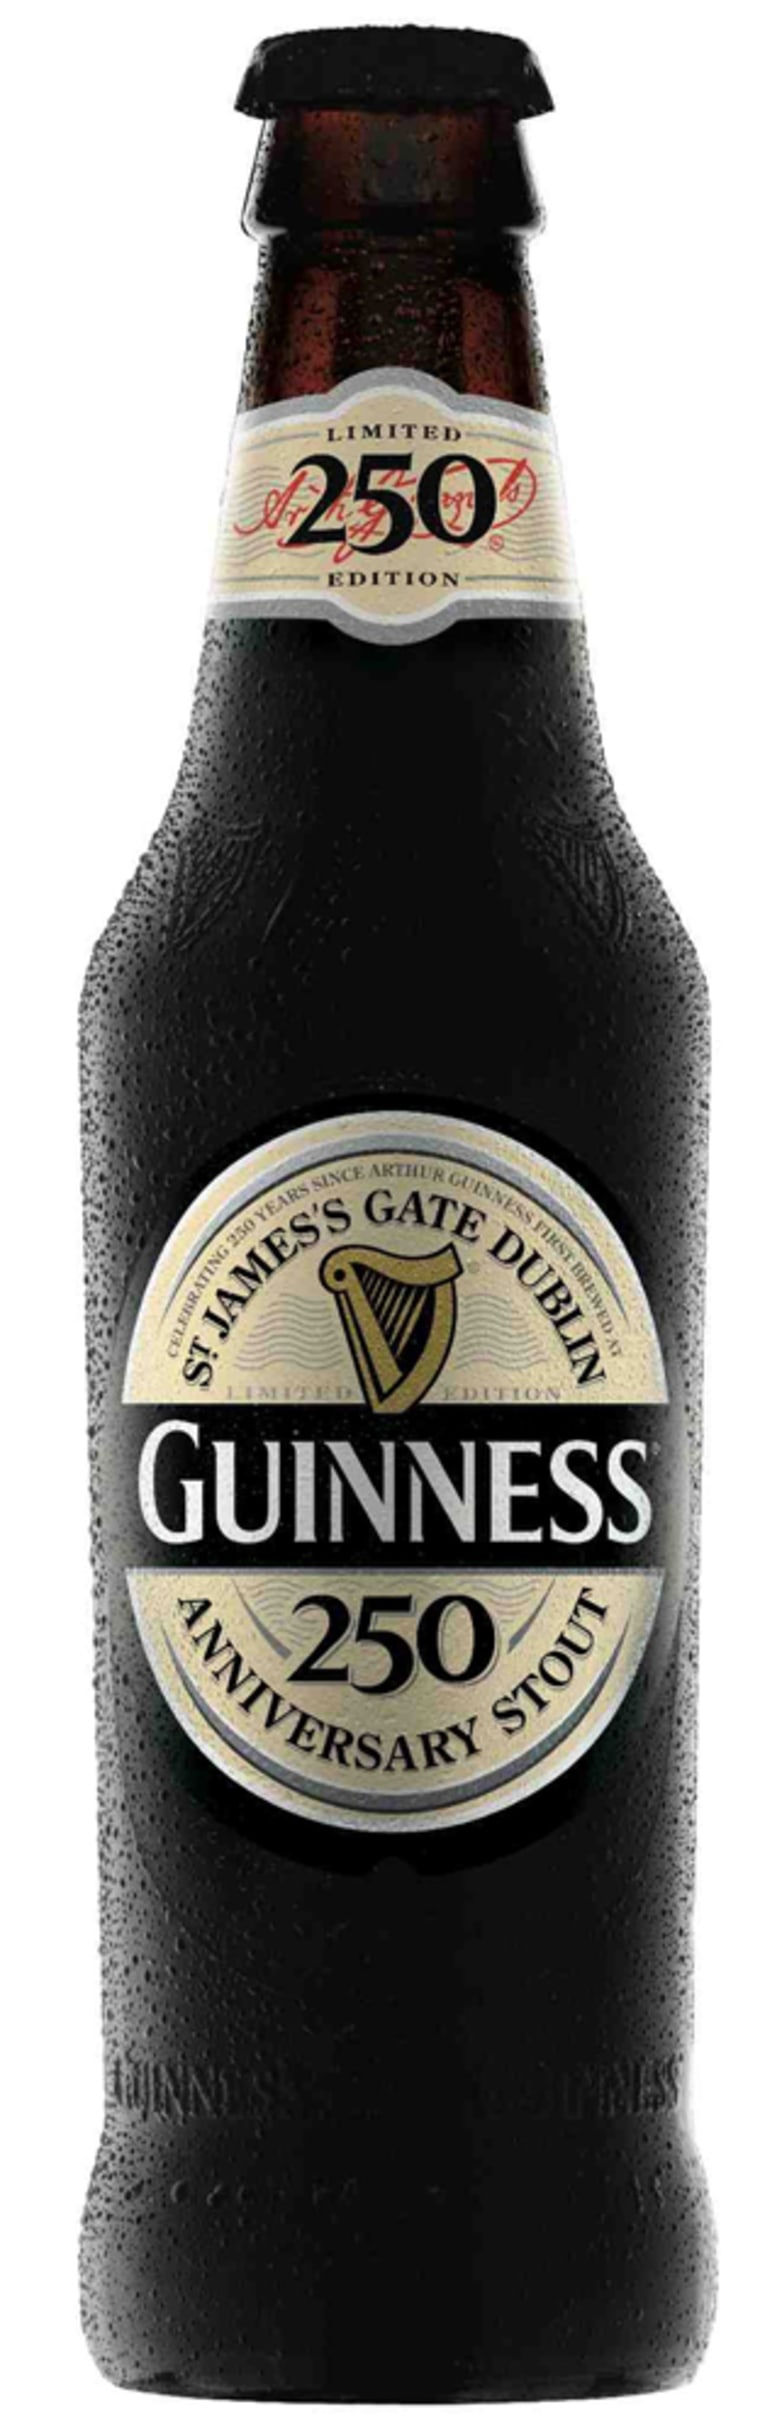 Image: Guinness 250 Anniversary Stout